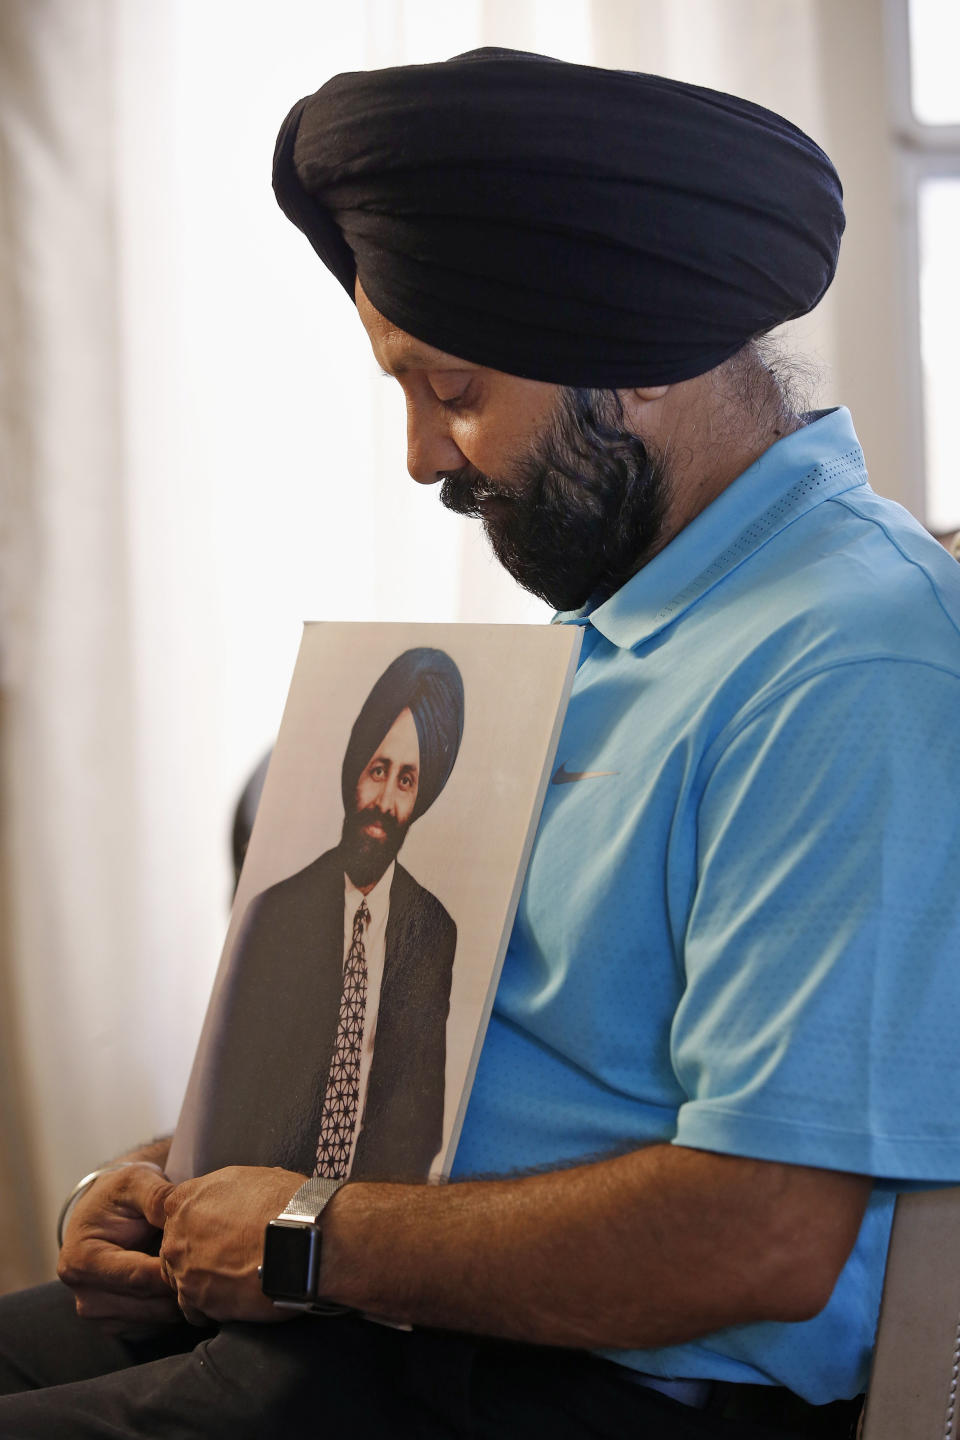 FILE - In this Aug. 19, 2016 file photo Rana Singh Sodhi, holds a photograph of his murdered brother, Balbir Singh Sodhi, in Gilbert, Ariz. The Sikh American was killed at his Arizona gas station four days following the Sept. 11 attacks by a man who announced he was "going to go out and shoot some towel-heads" and mistook him for an Arab Muslim. (AP Photo/Ross D. Franklin,File)